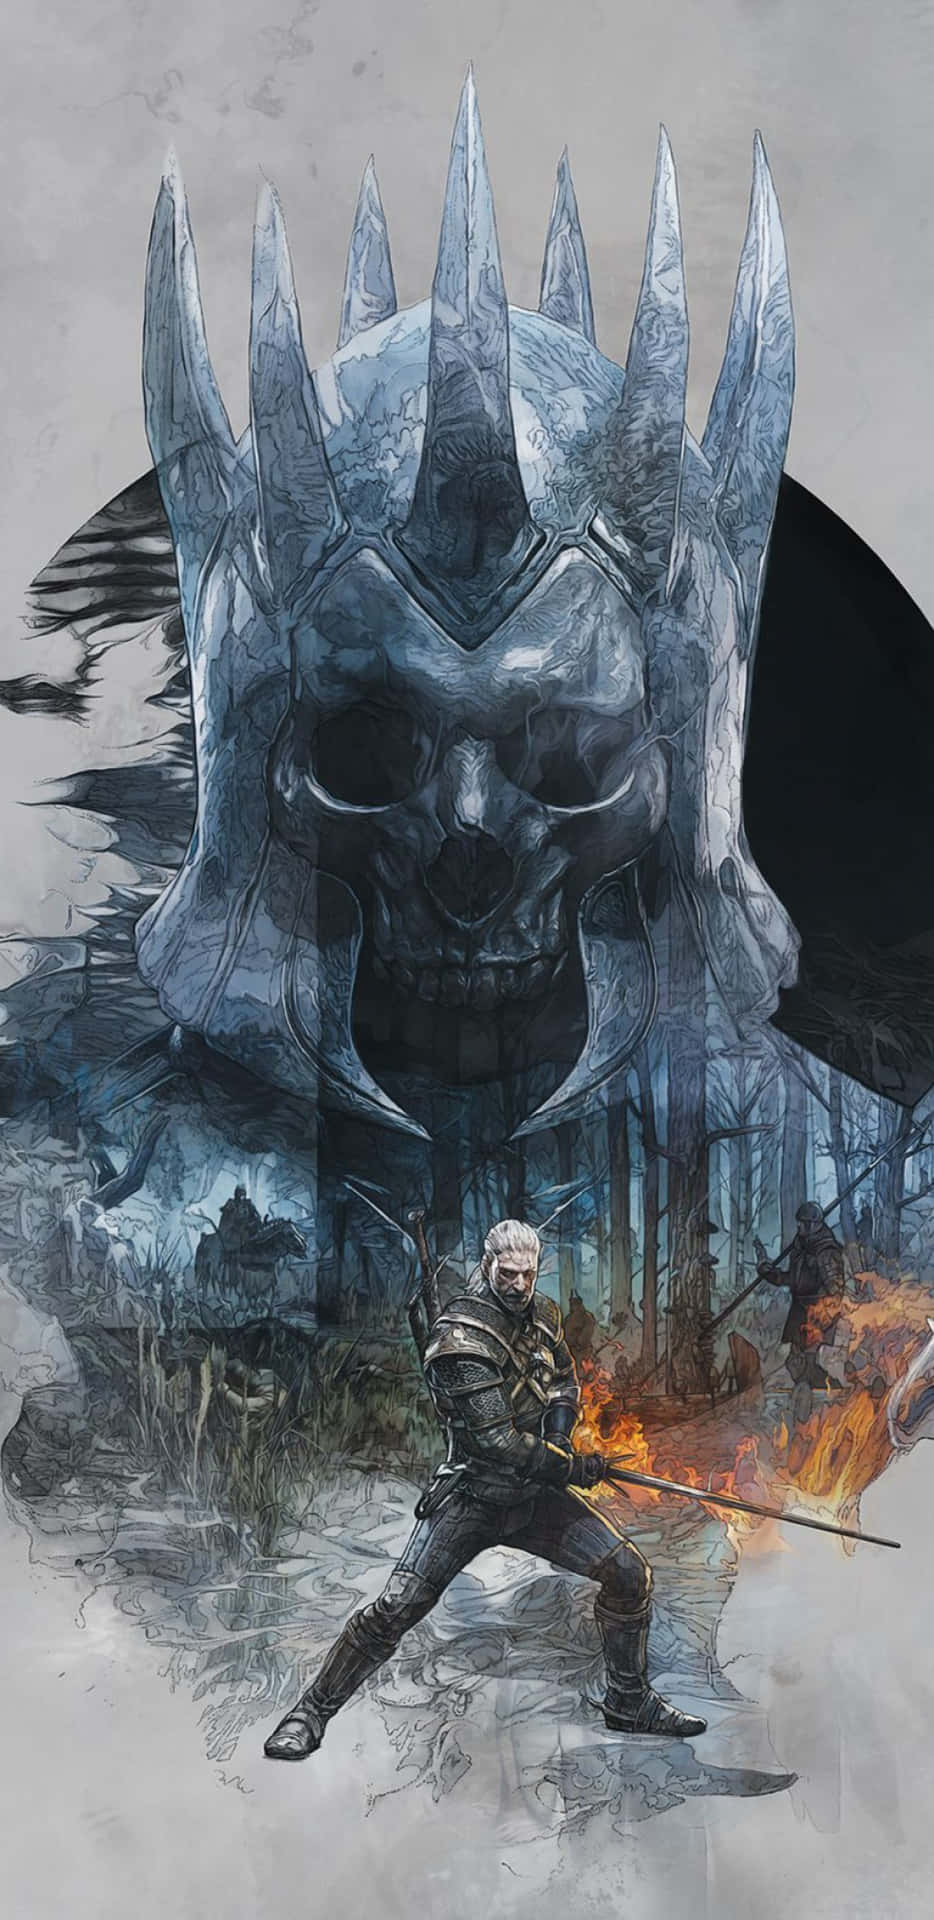 Pixel 3xl The Witcher 3 Background Skull